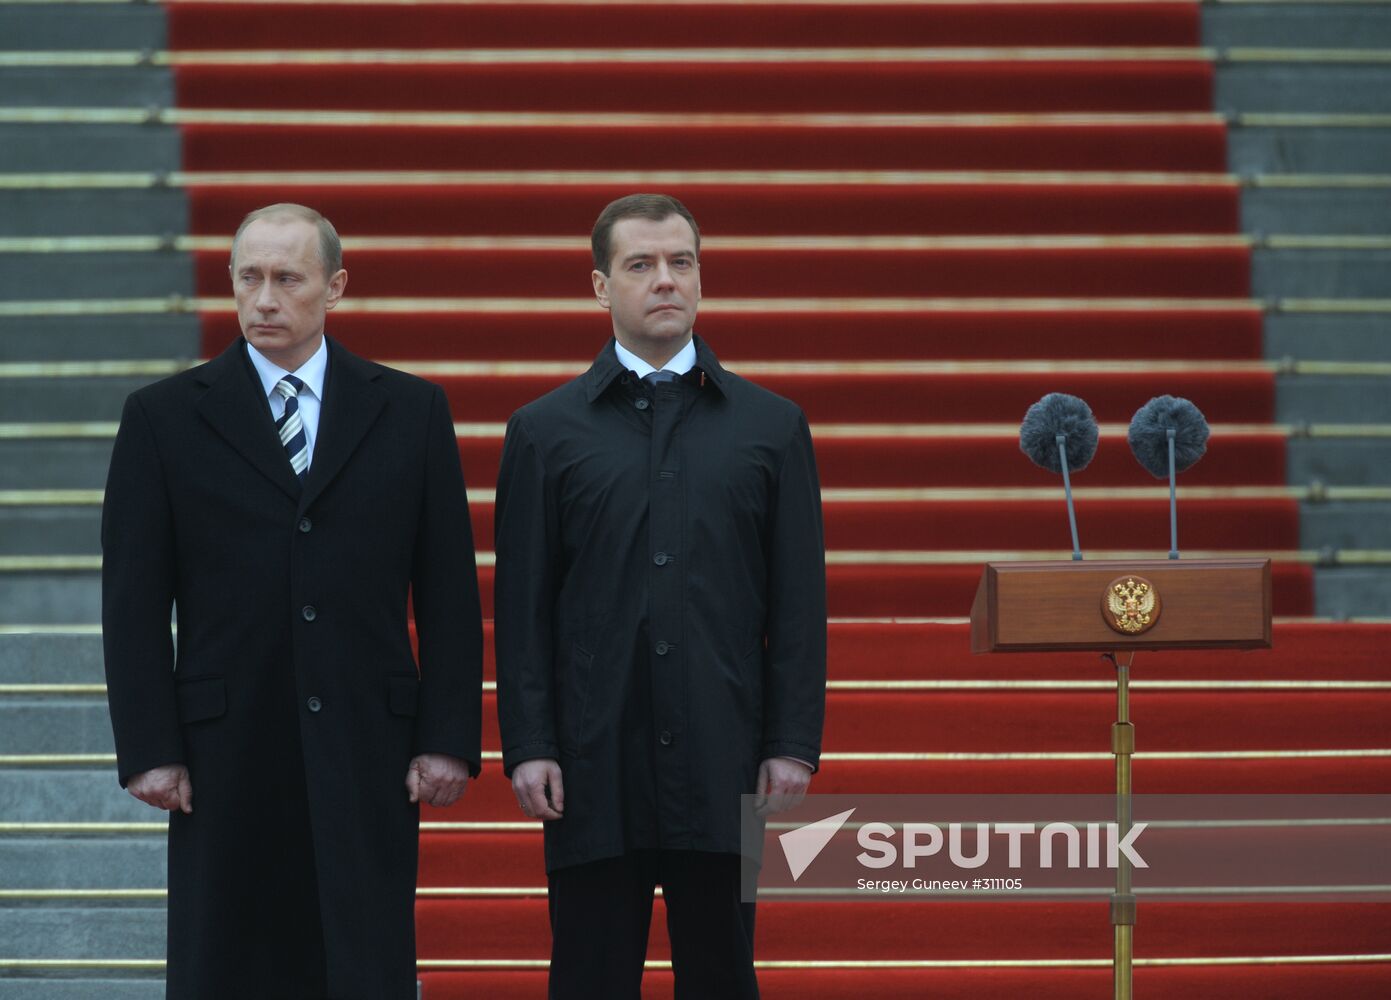 Inauguration of Dmitry Medvedev as President of Russia